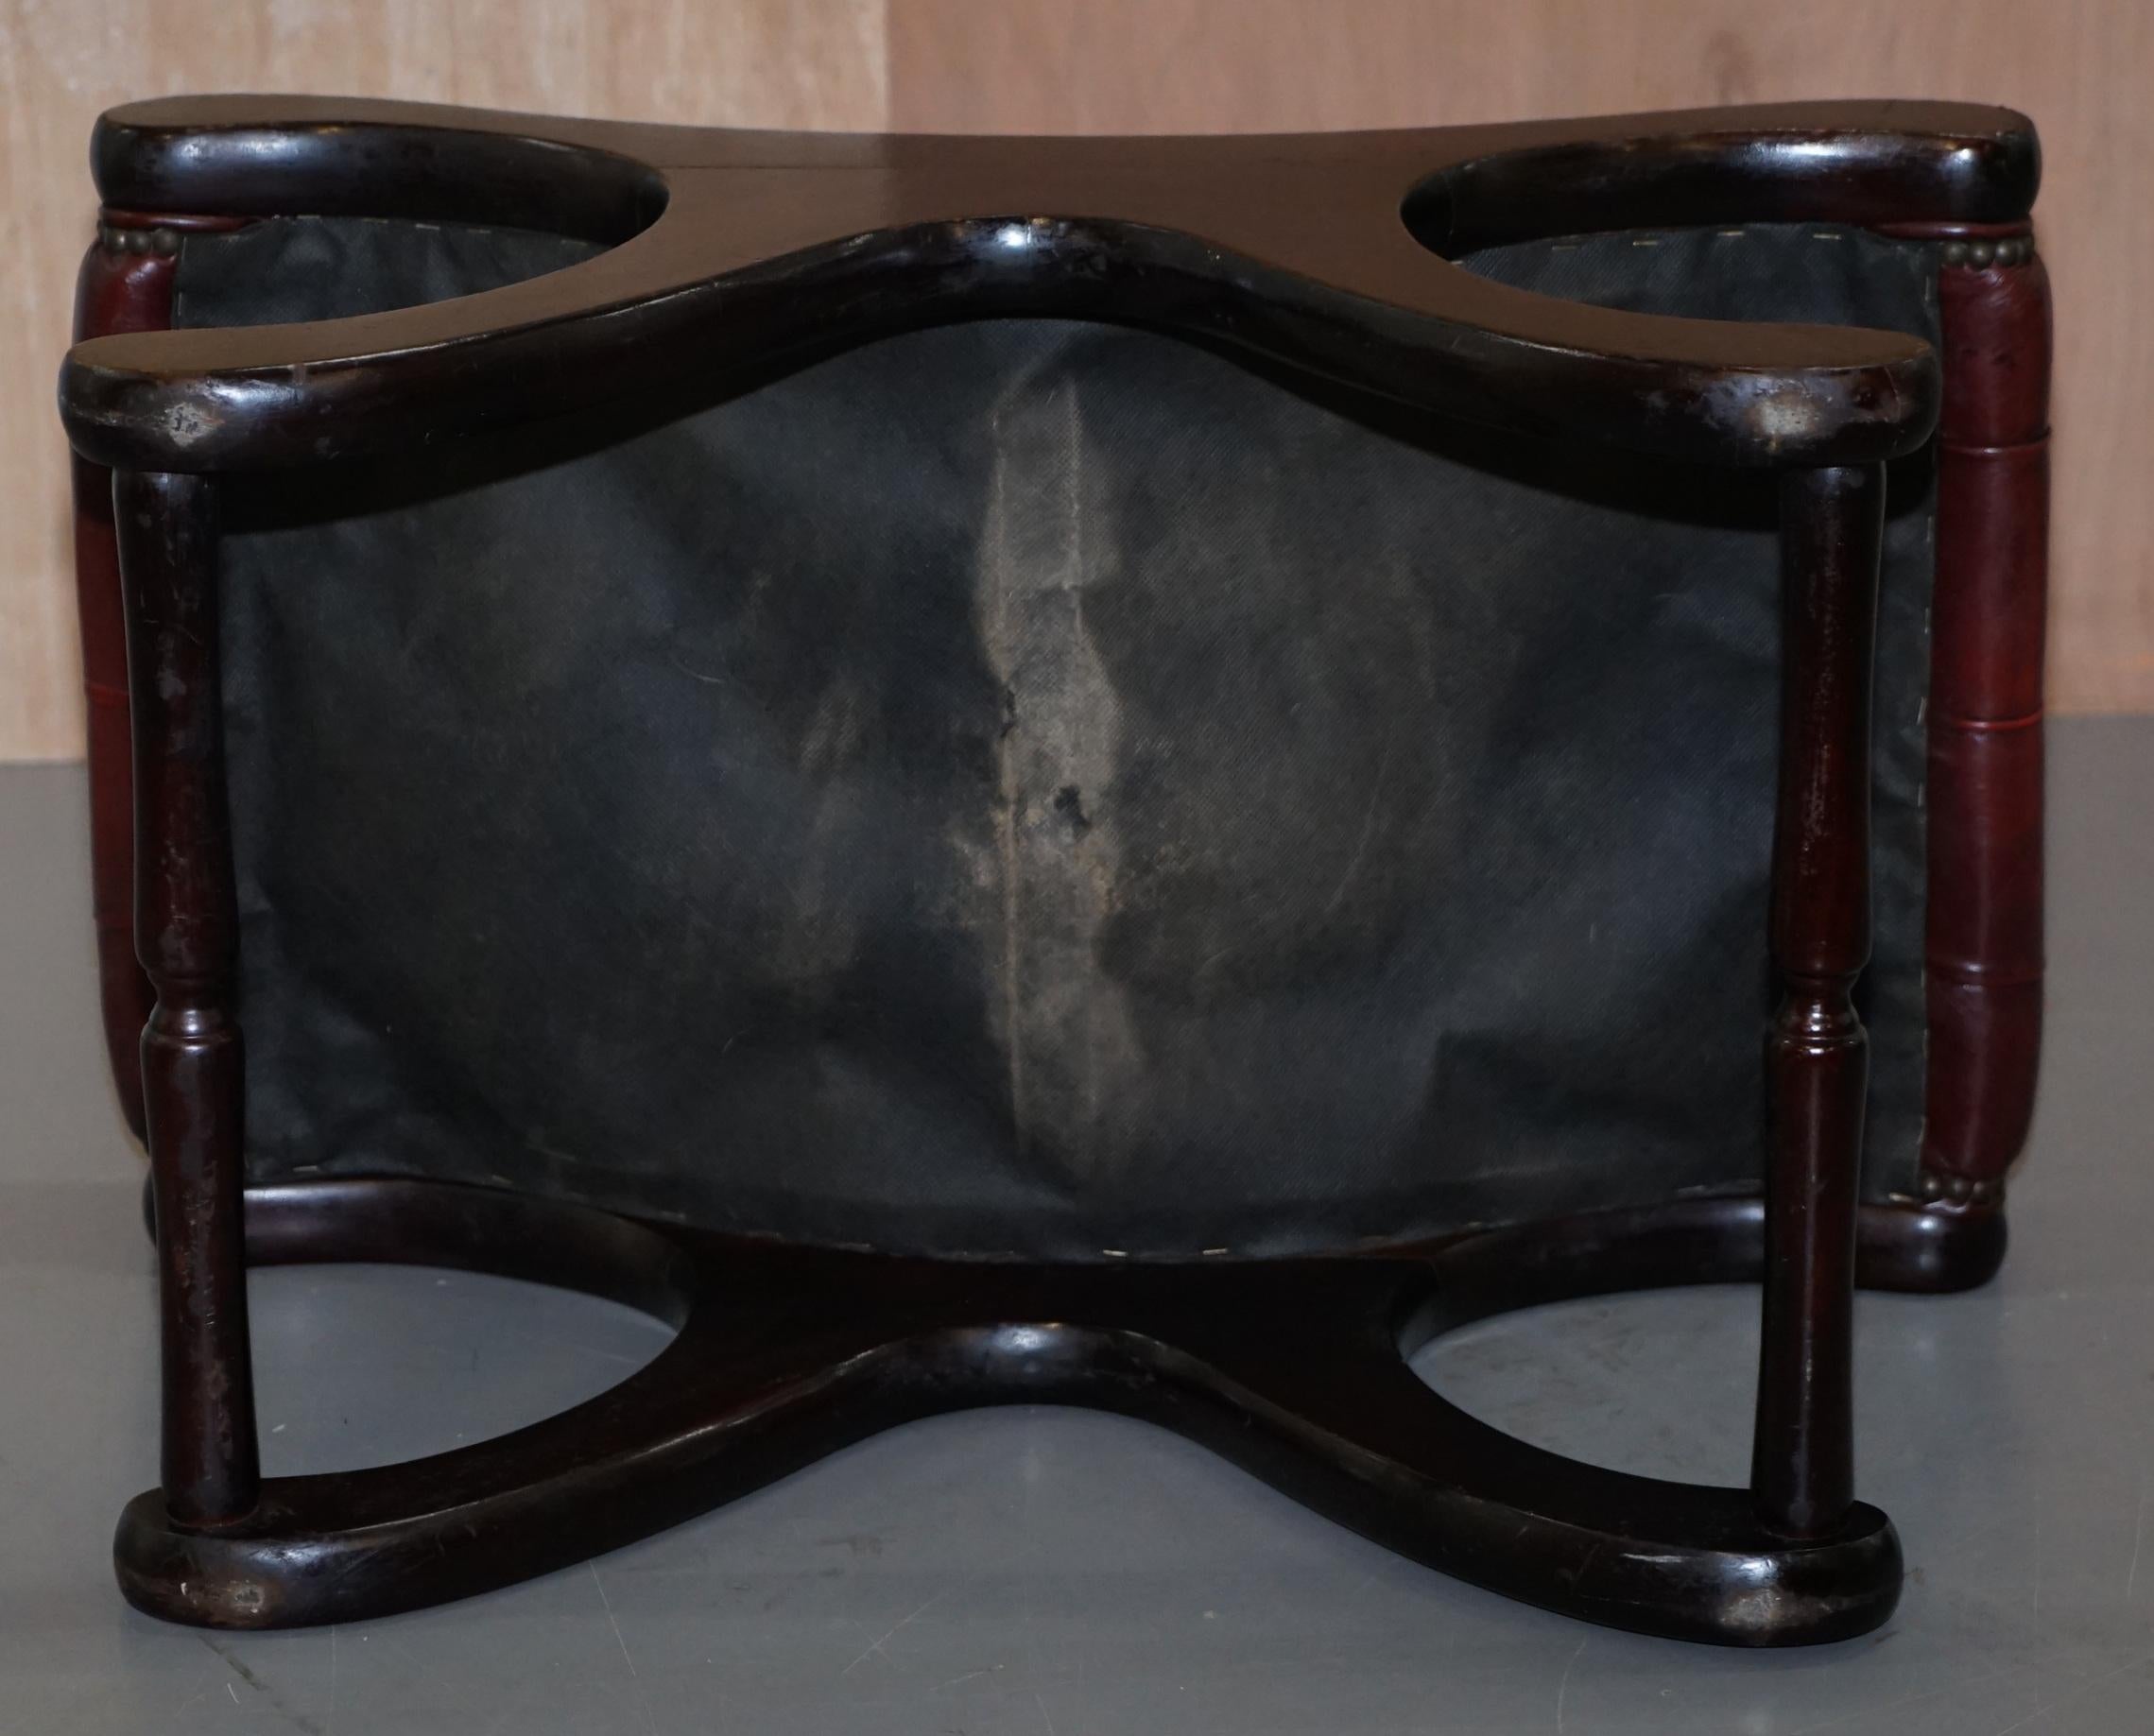 Lovely Chesterfield Oxblood Leather & Mahogany Curved Footstool Footrest Stool 2